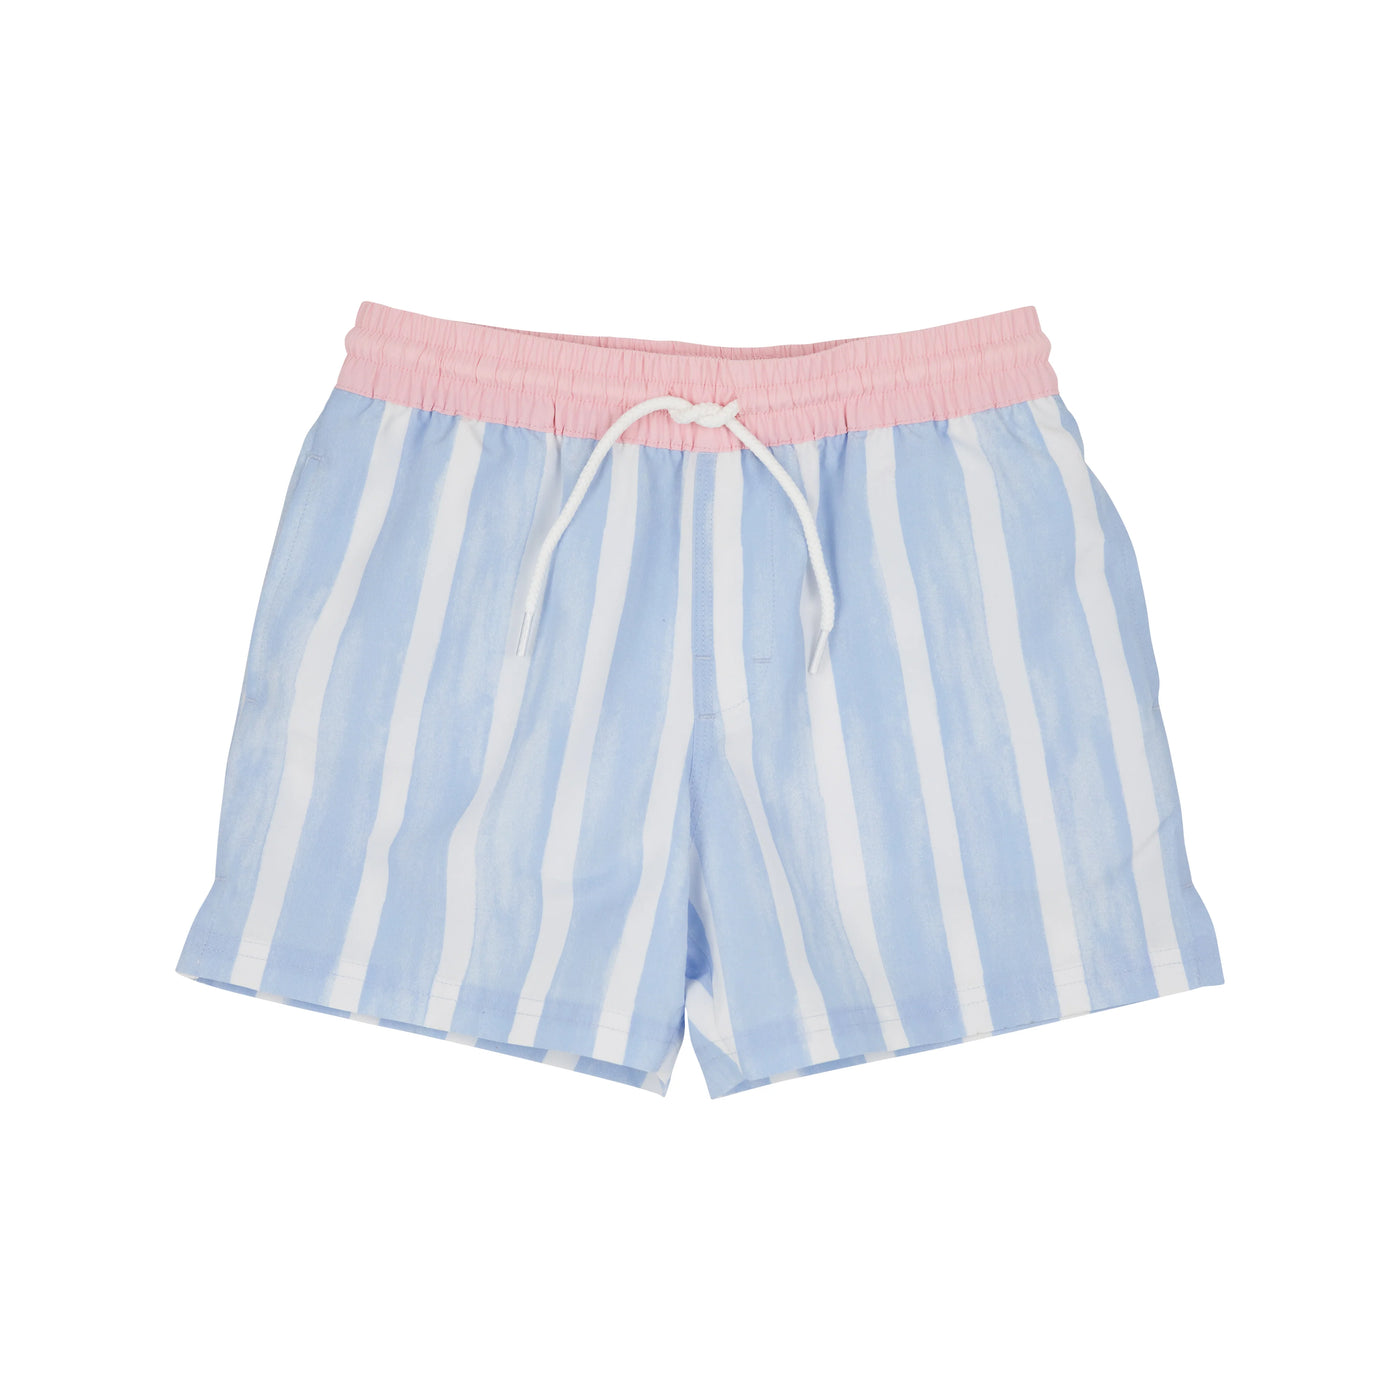 Sea Wall Stripe with Palm Beach Pink Turtle Bay Trunks